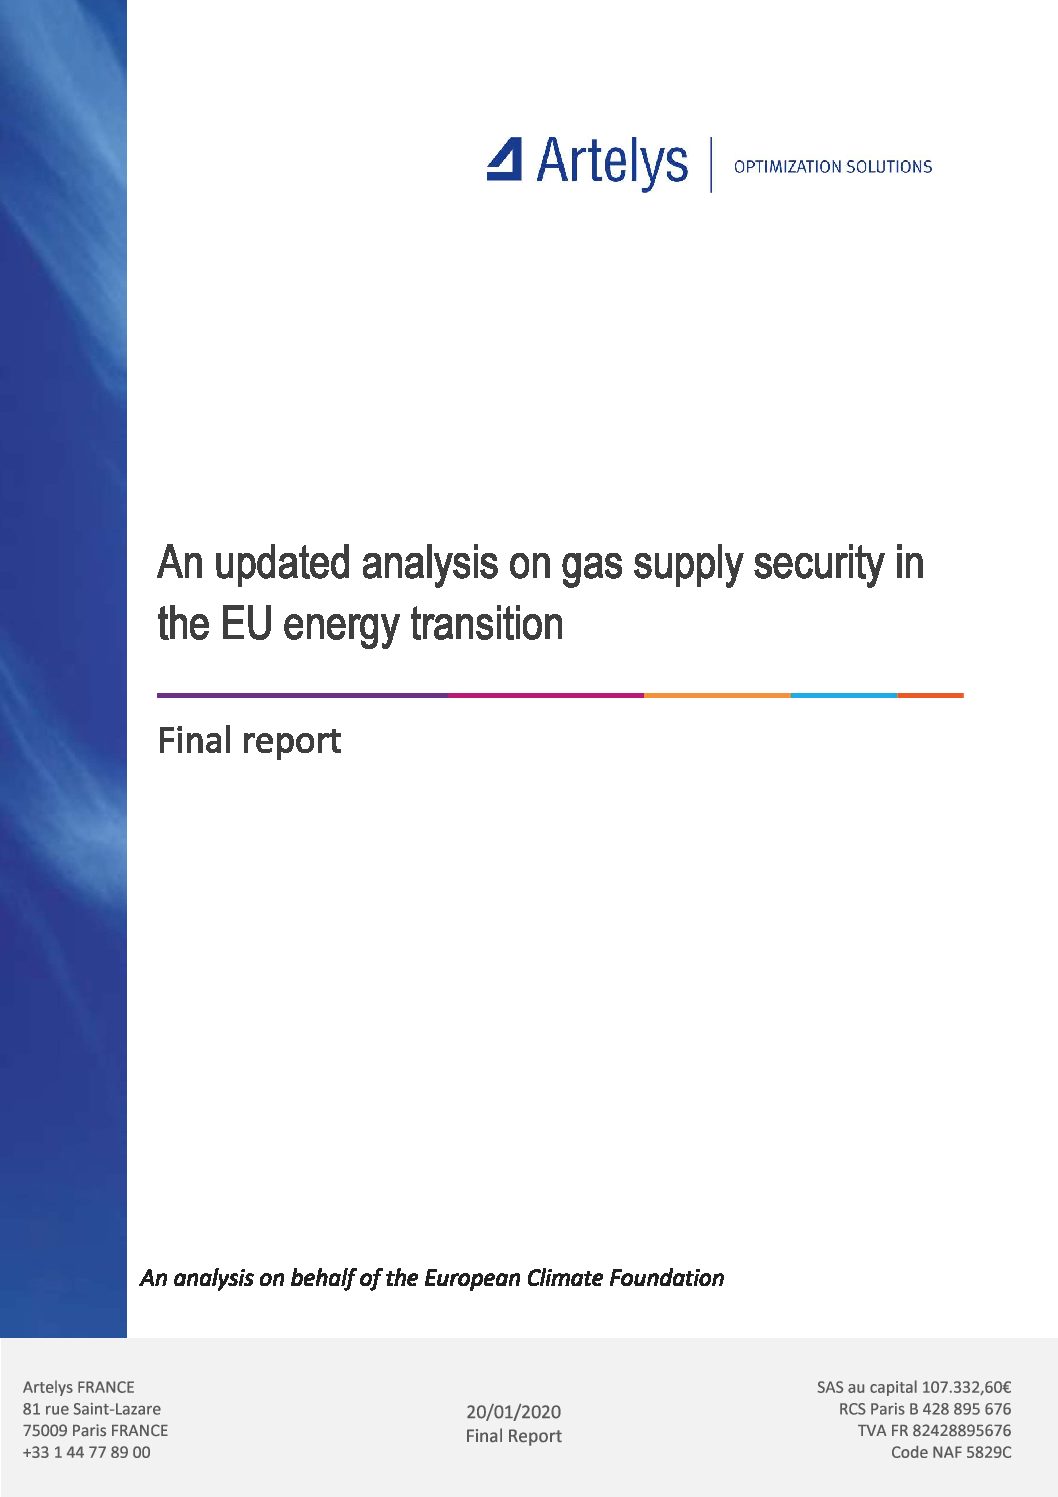 An updated analysis on gas supply security in the EU energy transition